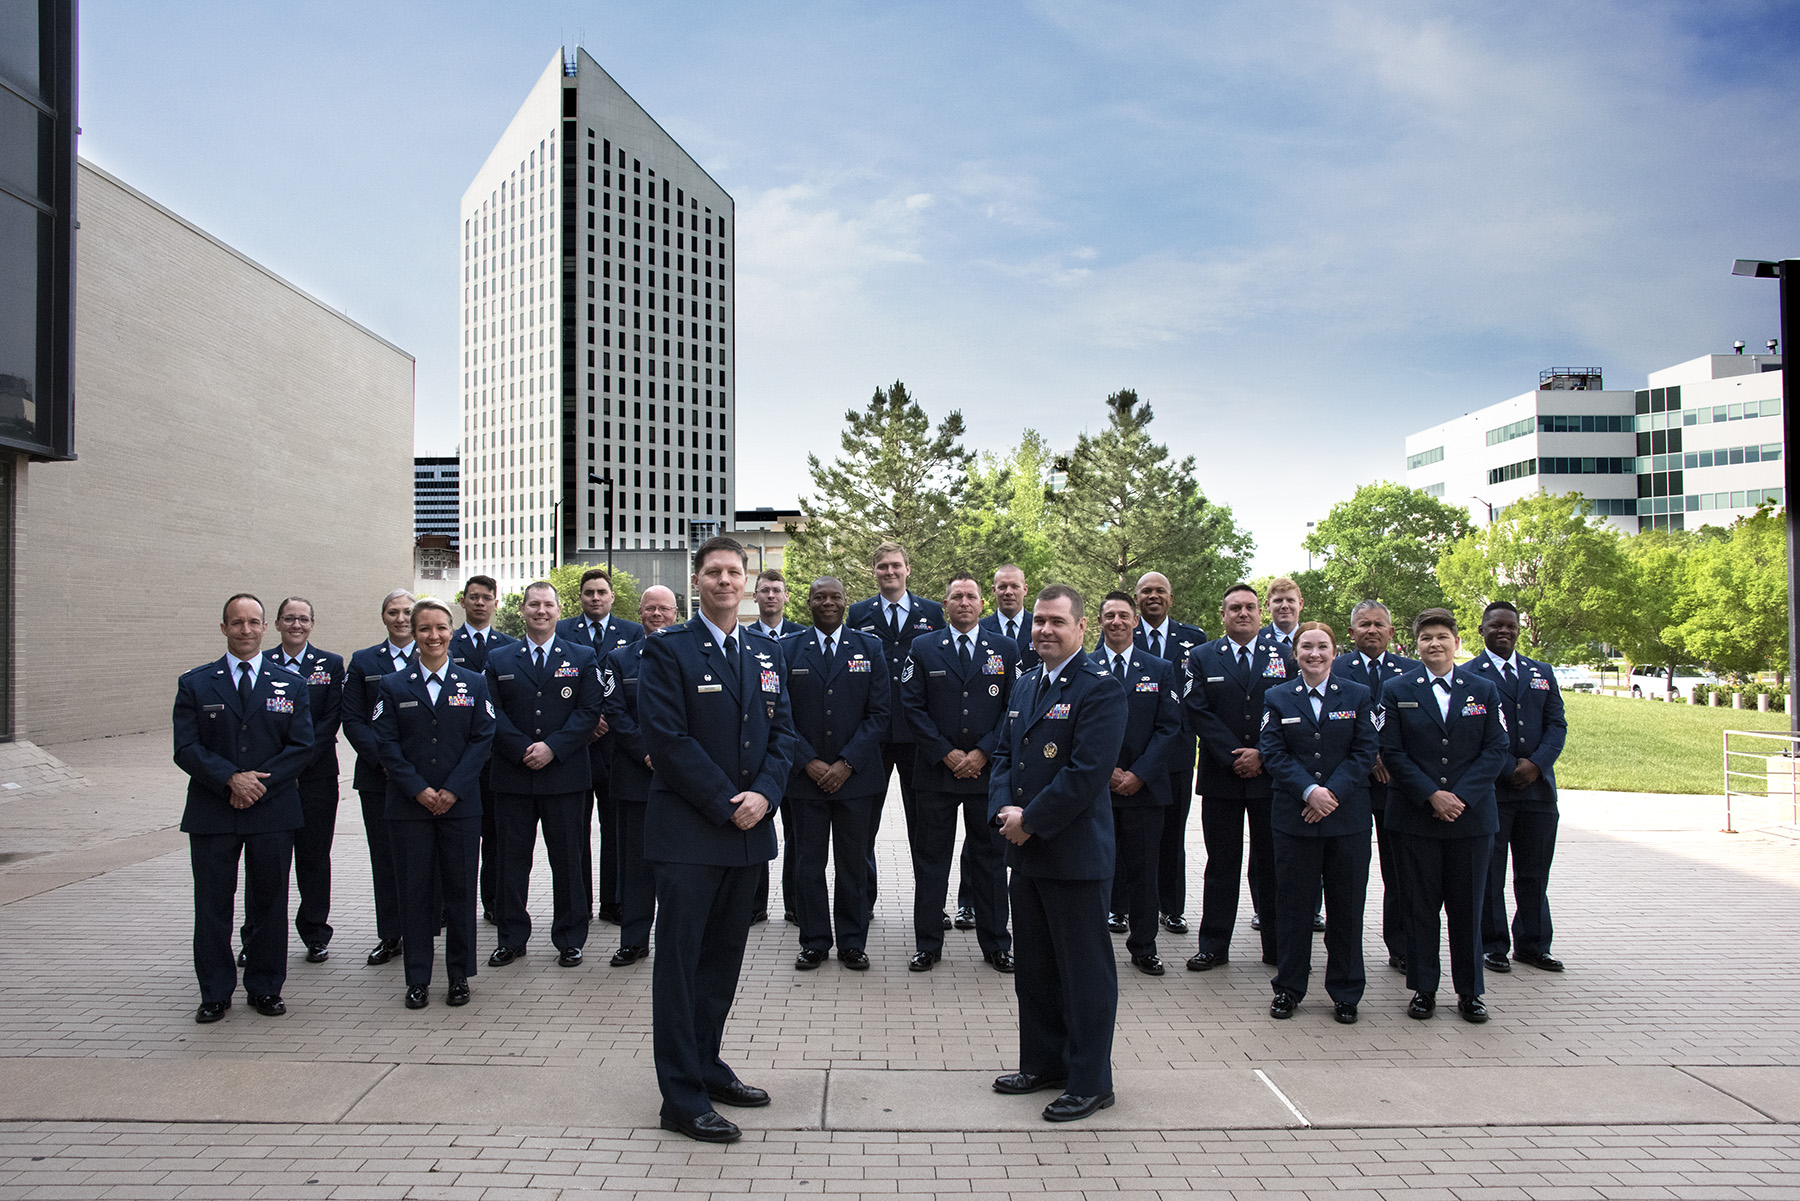 Airmen of the 184th Wing who attended the ceremony.